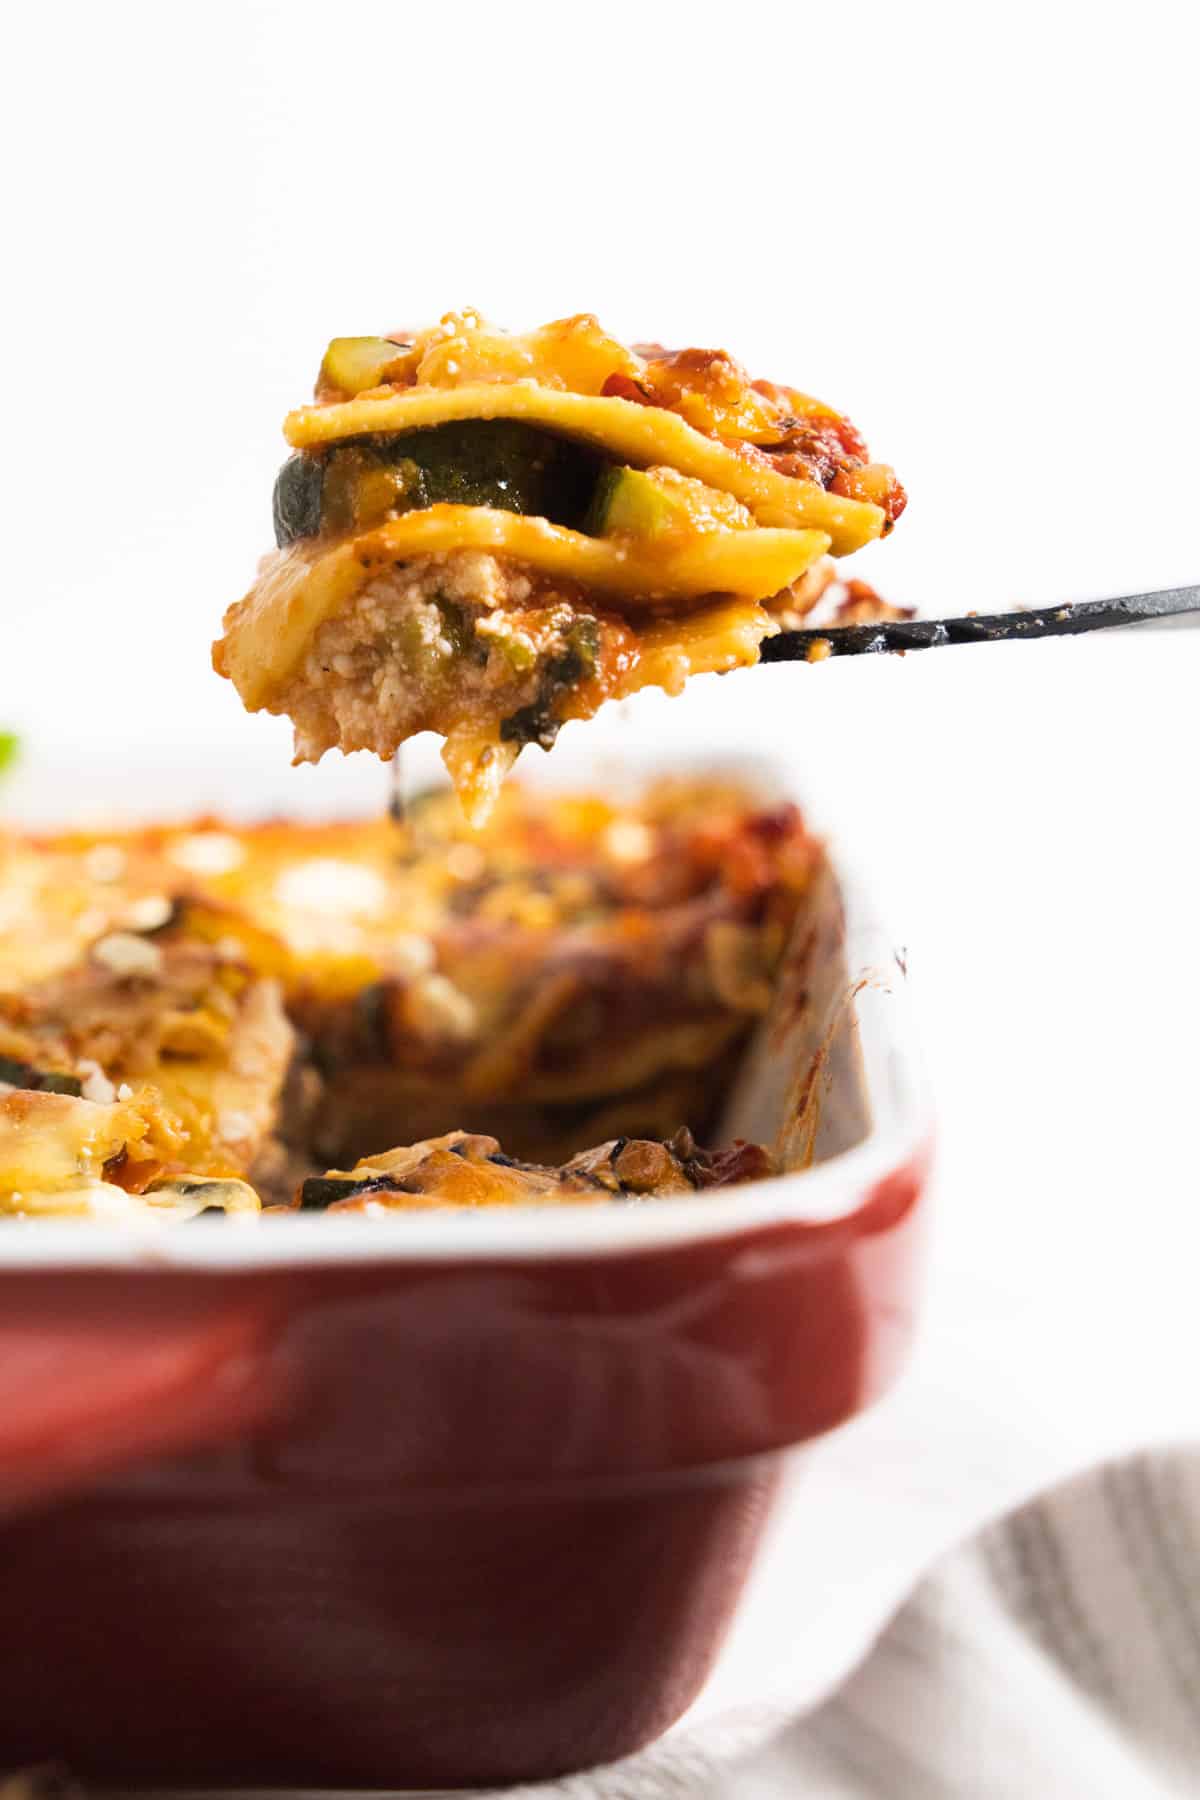 spatula holding a portion of lasagna over a red baking dish.